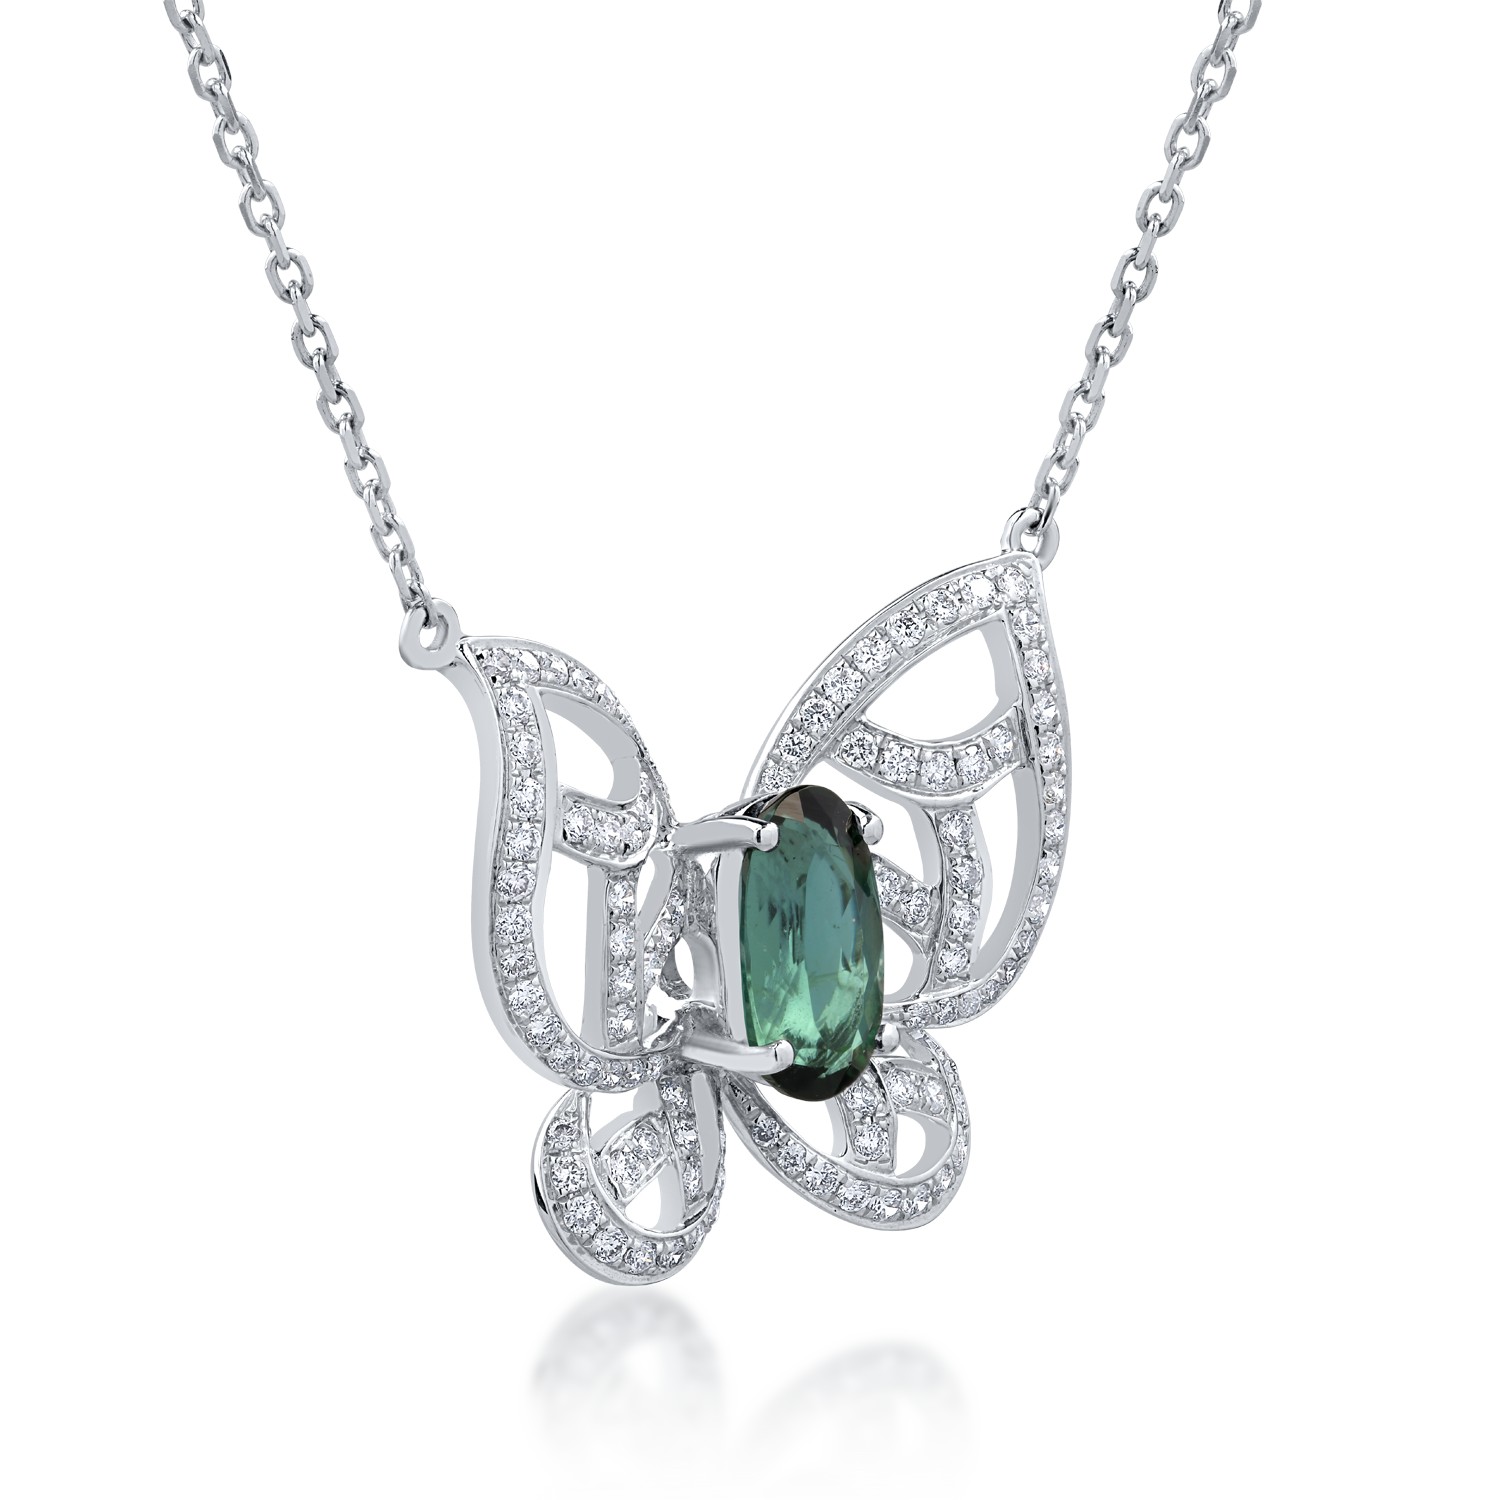 18K white gold butterfly necklace with 1.6ct green tourmaline and 0.54ct diamonds